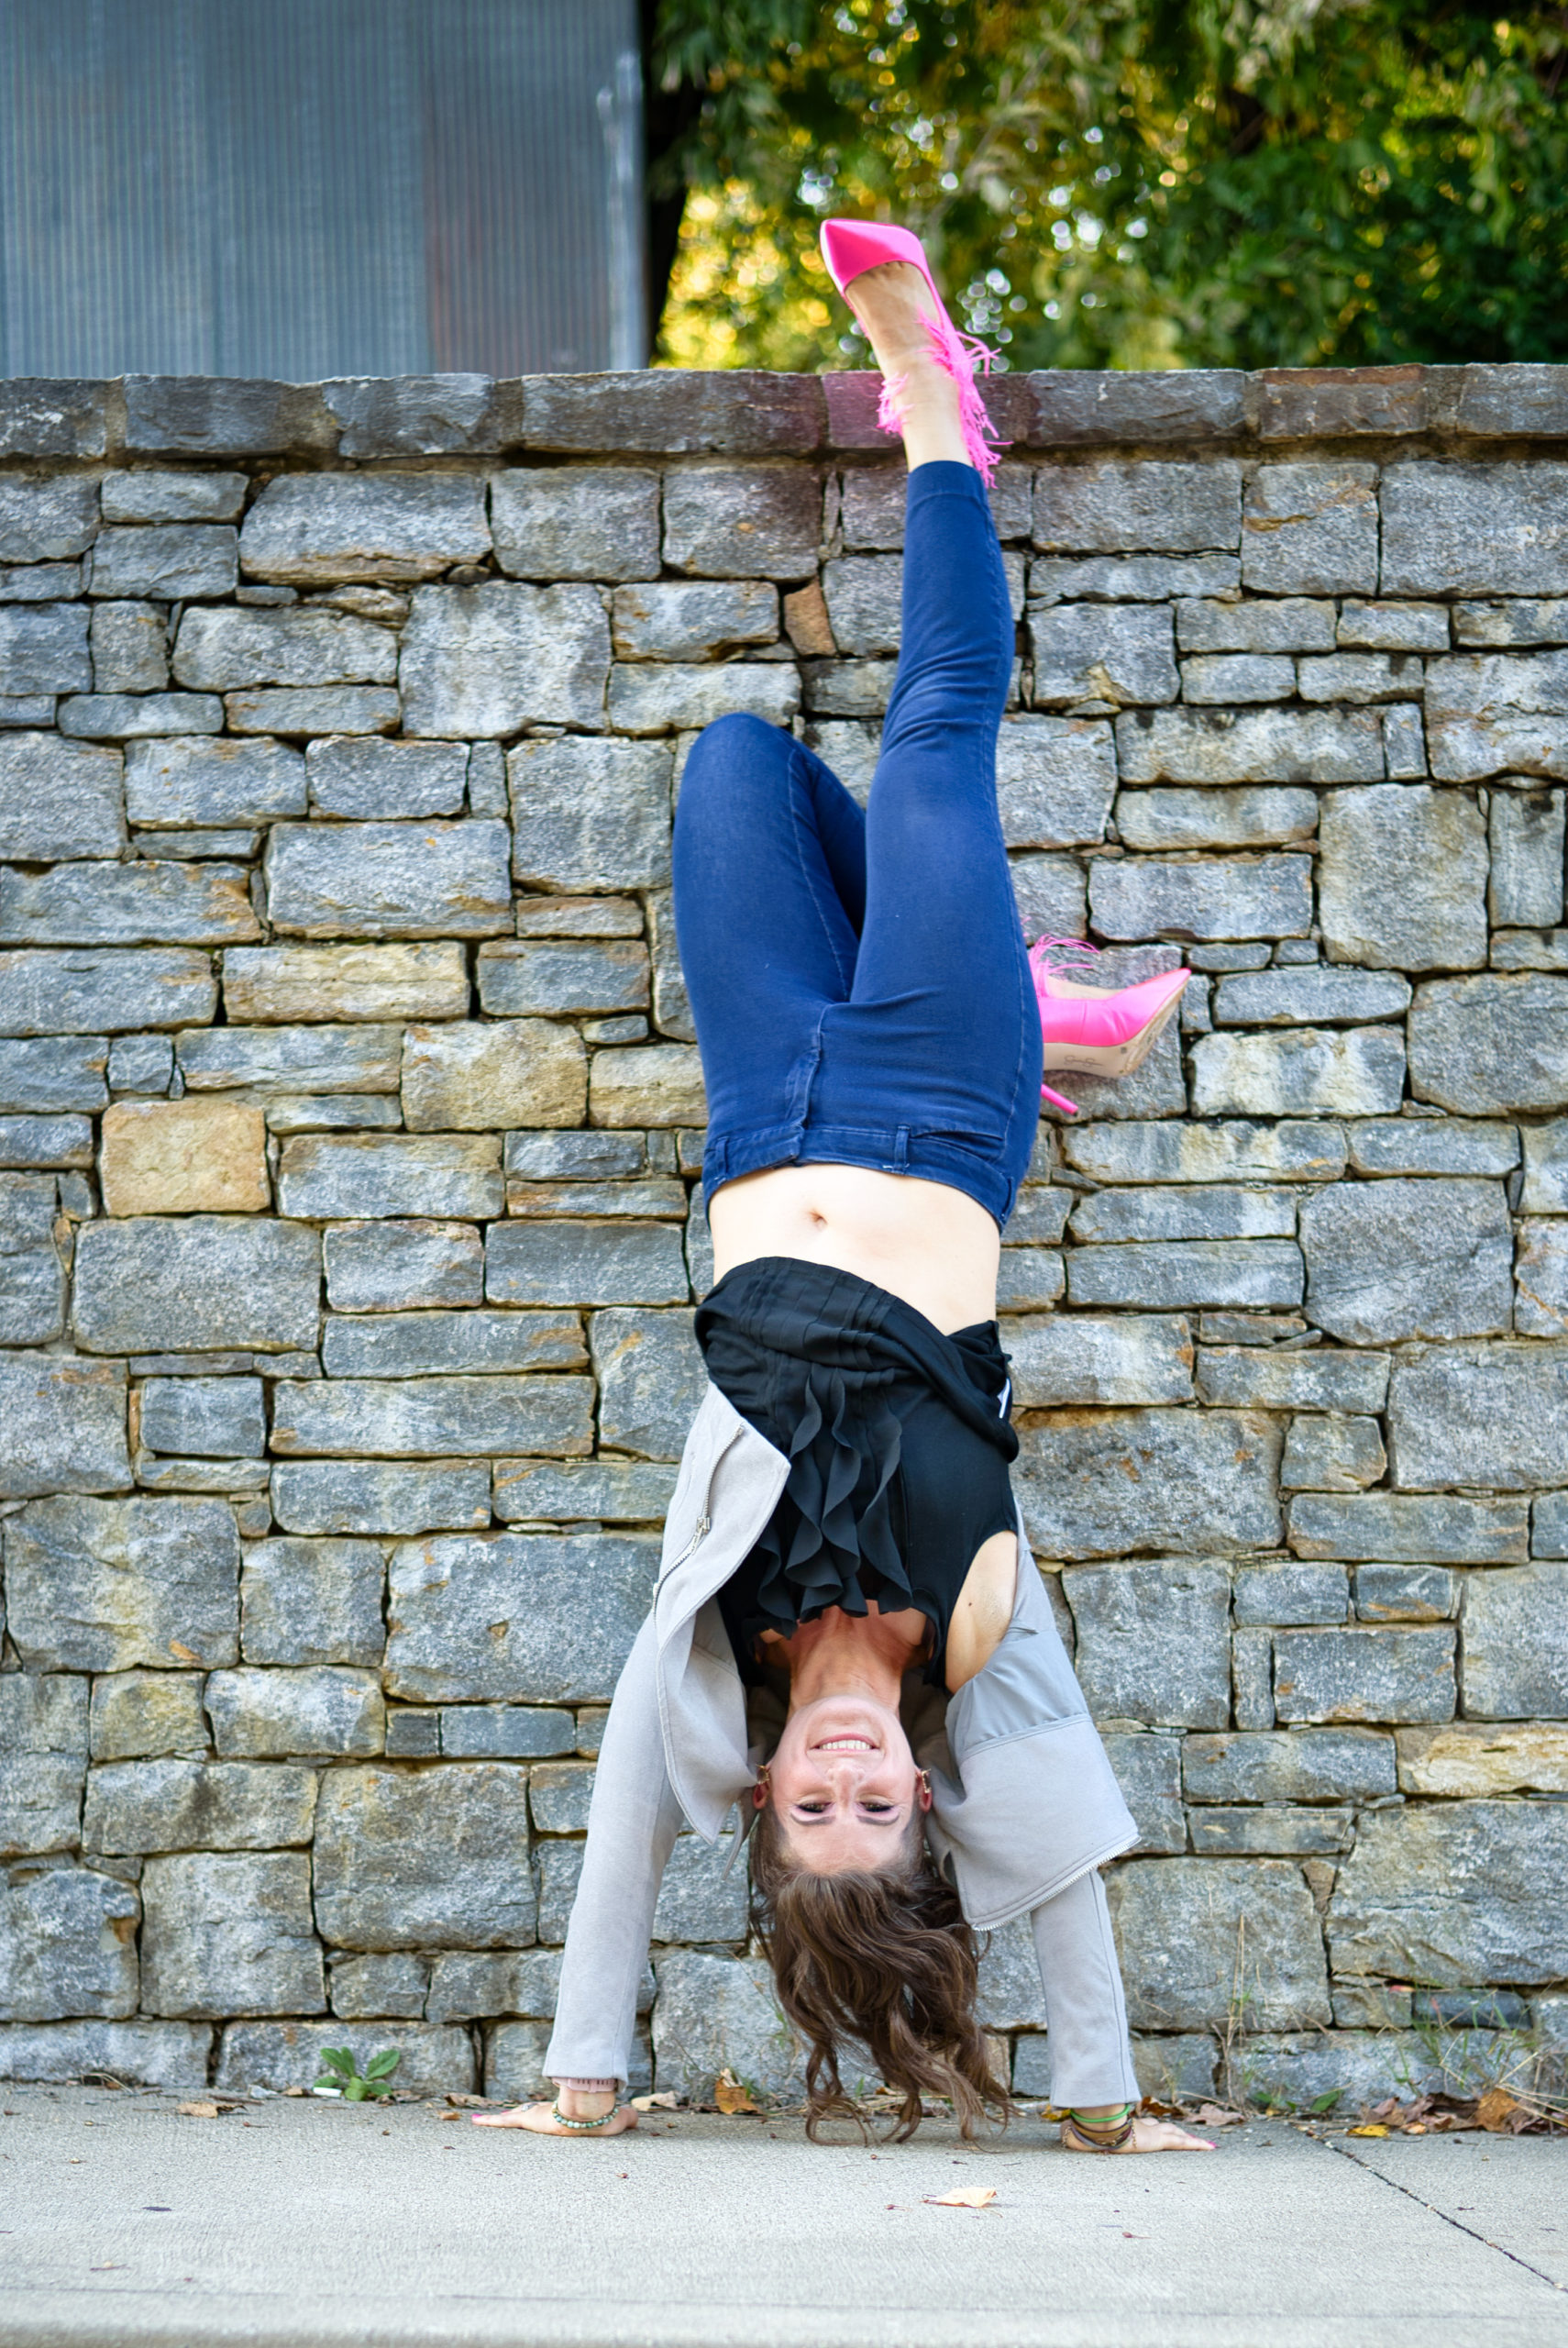 Dr. Andrea Moore does a hand stand in front of a stone wall while wearing hot pink high heels. She is promoting her Pain to Power Group for chronic pain.